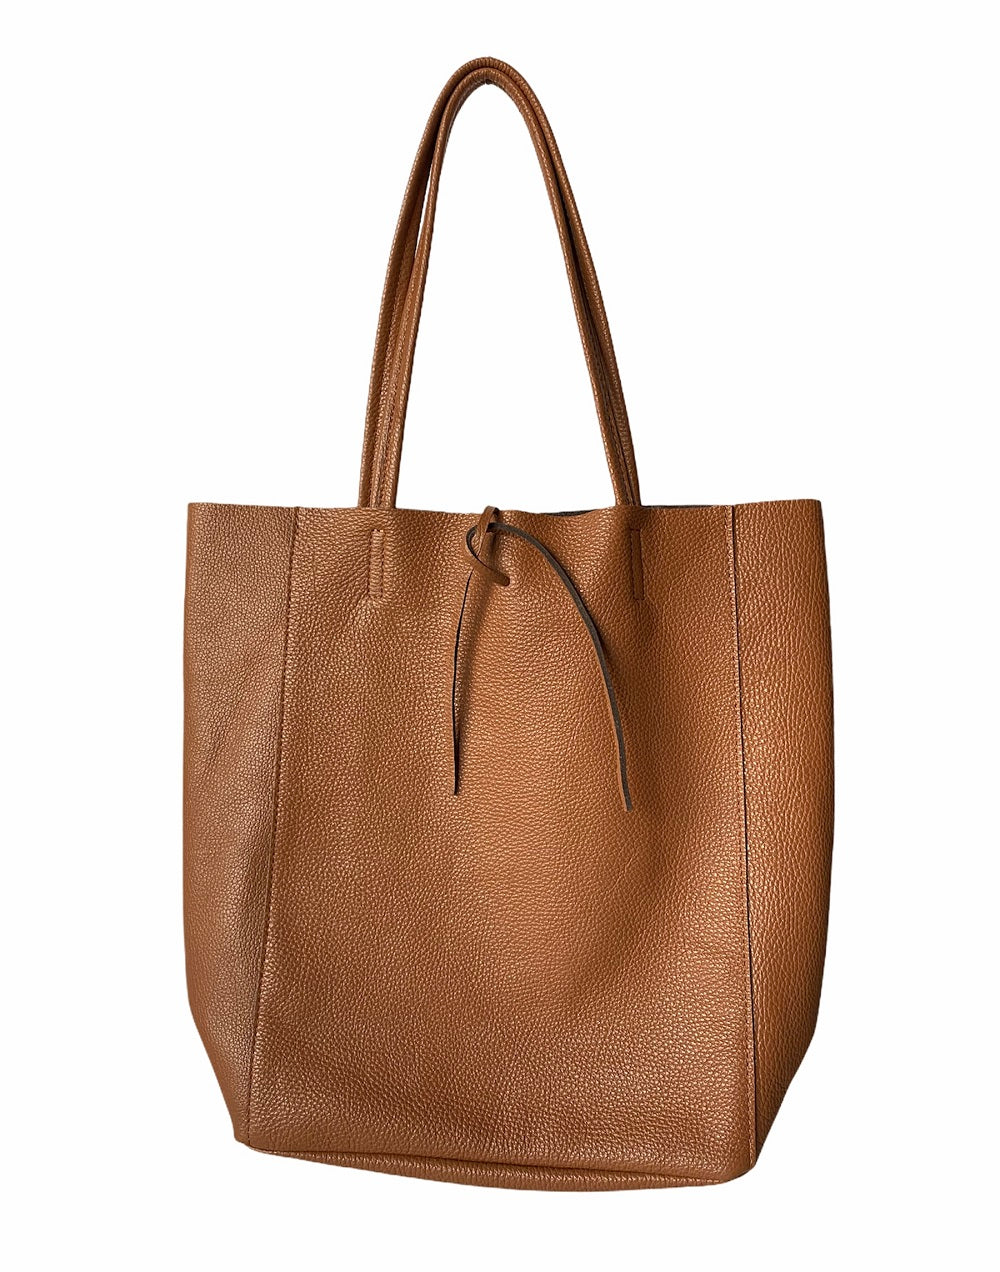 LEATHER TOTE BAG | H+B CLASSIC BURNT UMBER LEATHER TOTE BAG | Hand+Built  Leather Goods